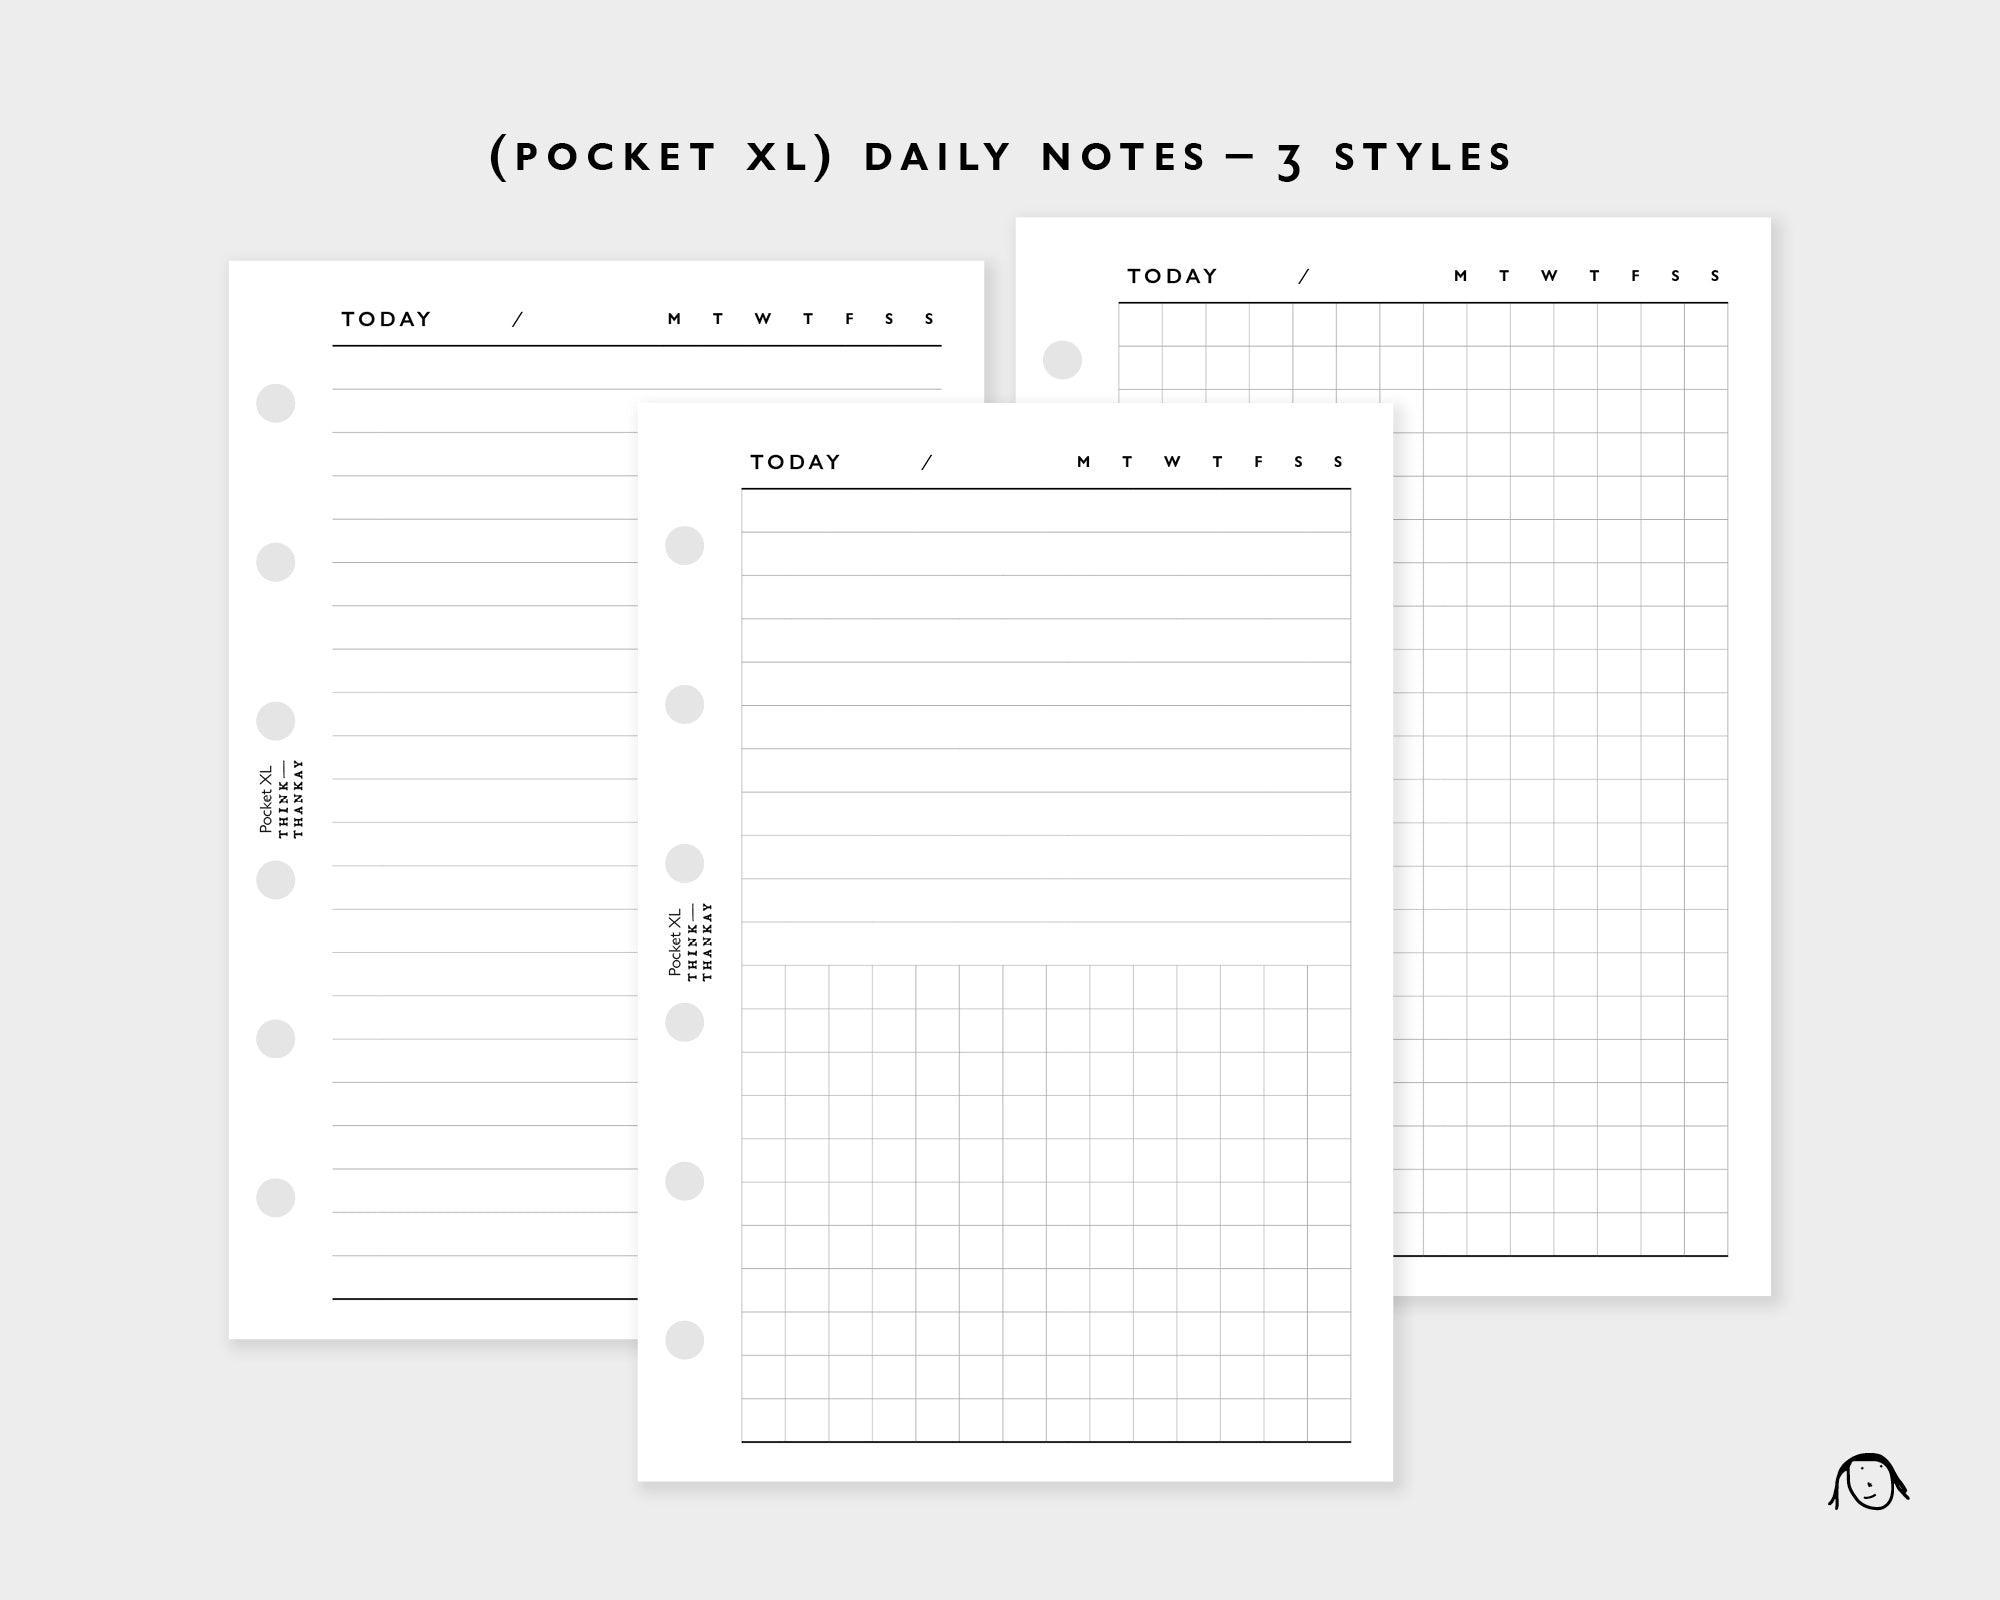 D3: Daily Notes – 3 Styles